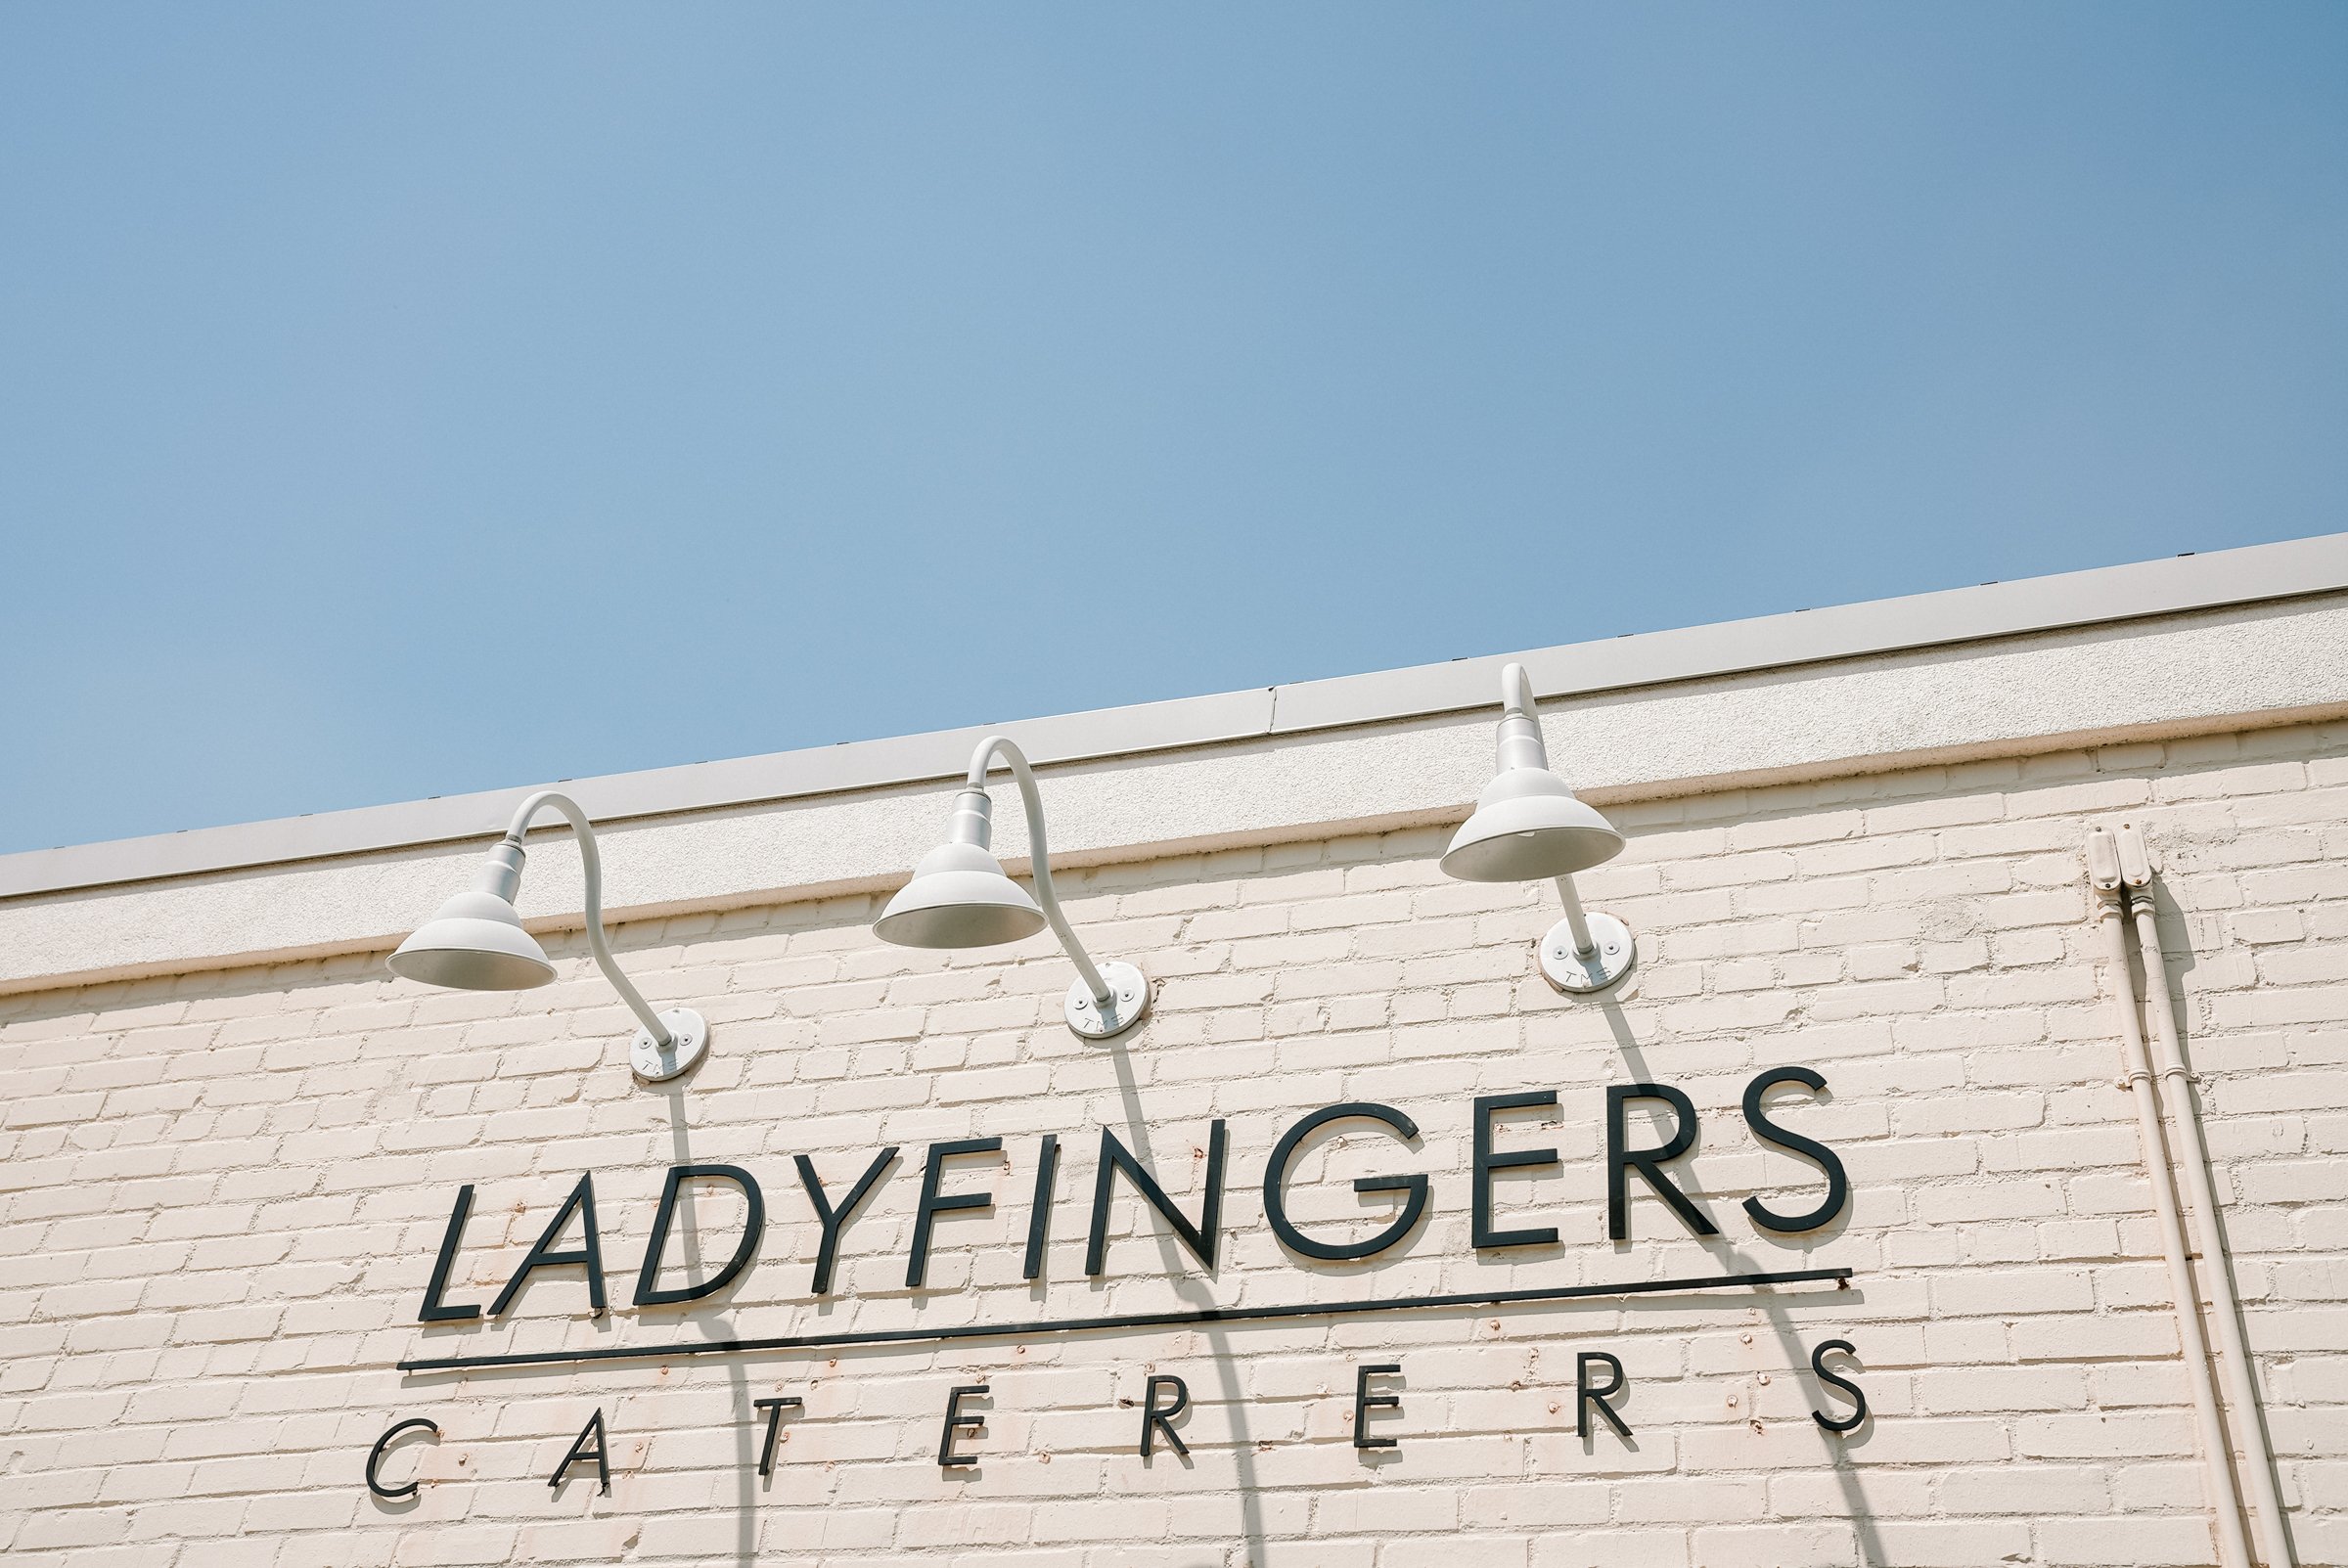 Lady-Fingers-Catering-Selects-219.jpg